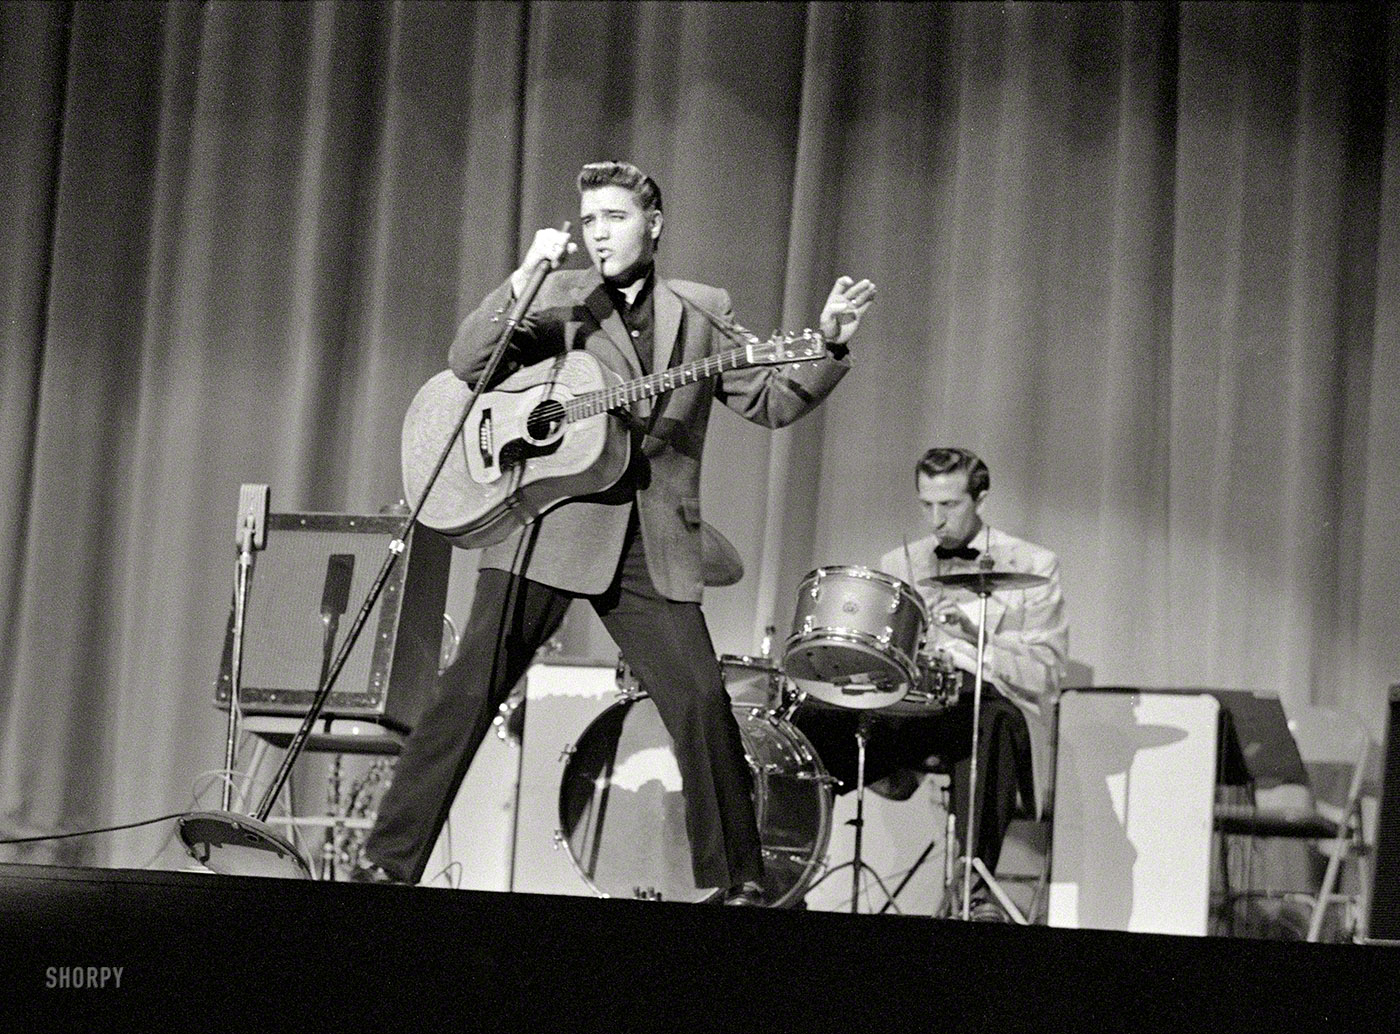 Elvis Presley at a 1956 concert date; we're counting the minutes until someone can tell us which one. Photo by Phillip Harrington for Look. View full size.